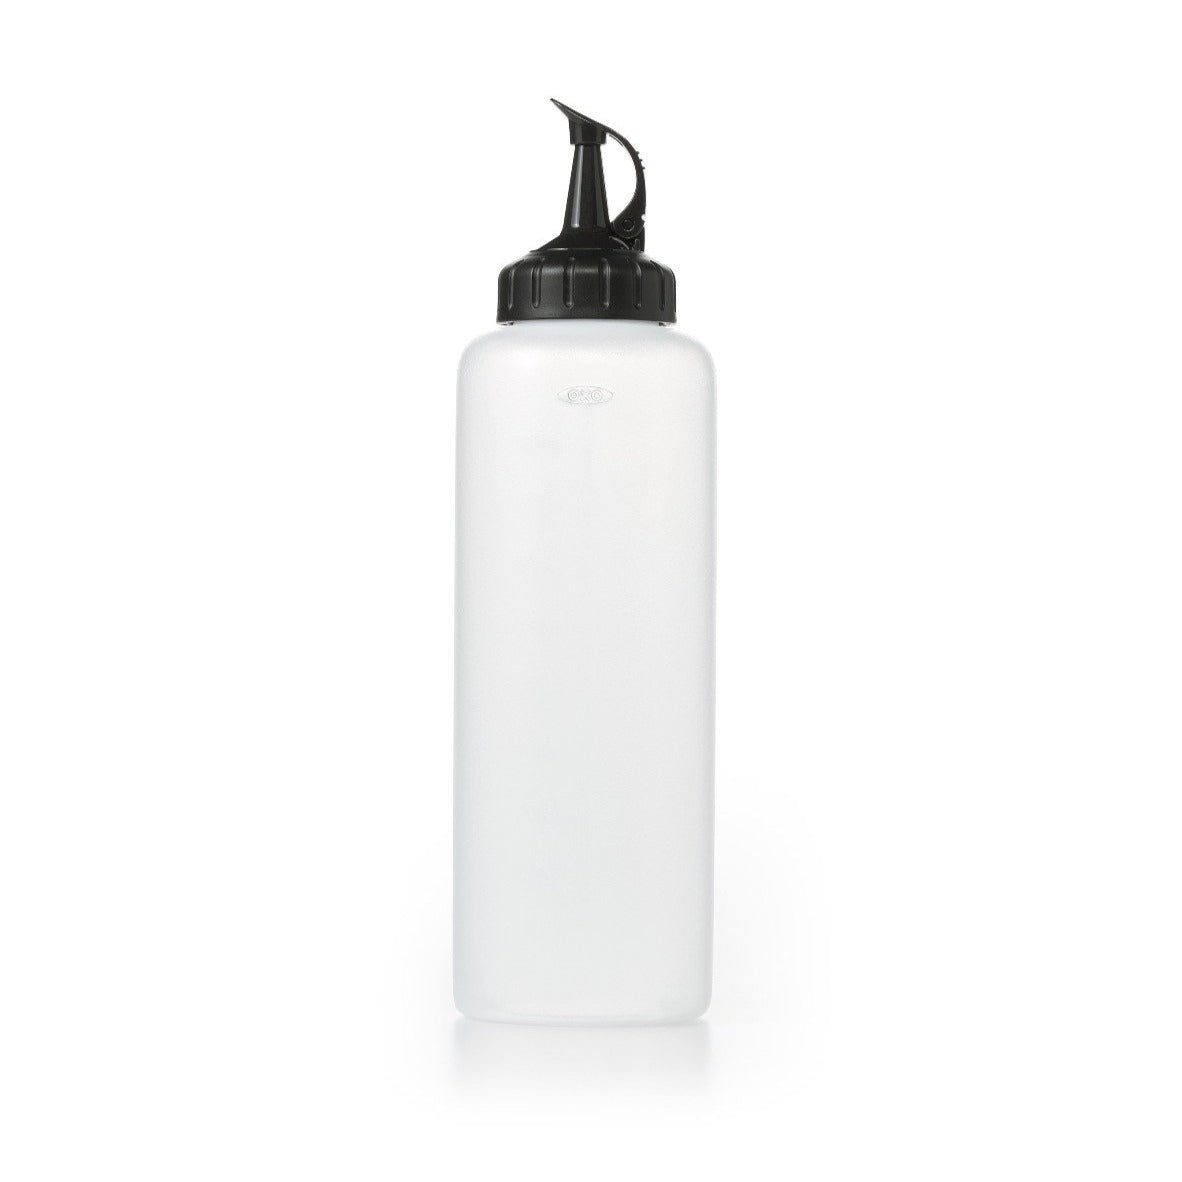 OXO Good Grips Squeeze Bottle - 16oz